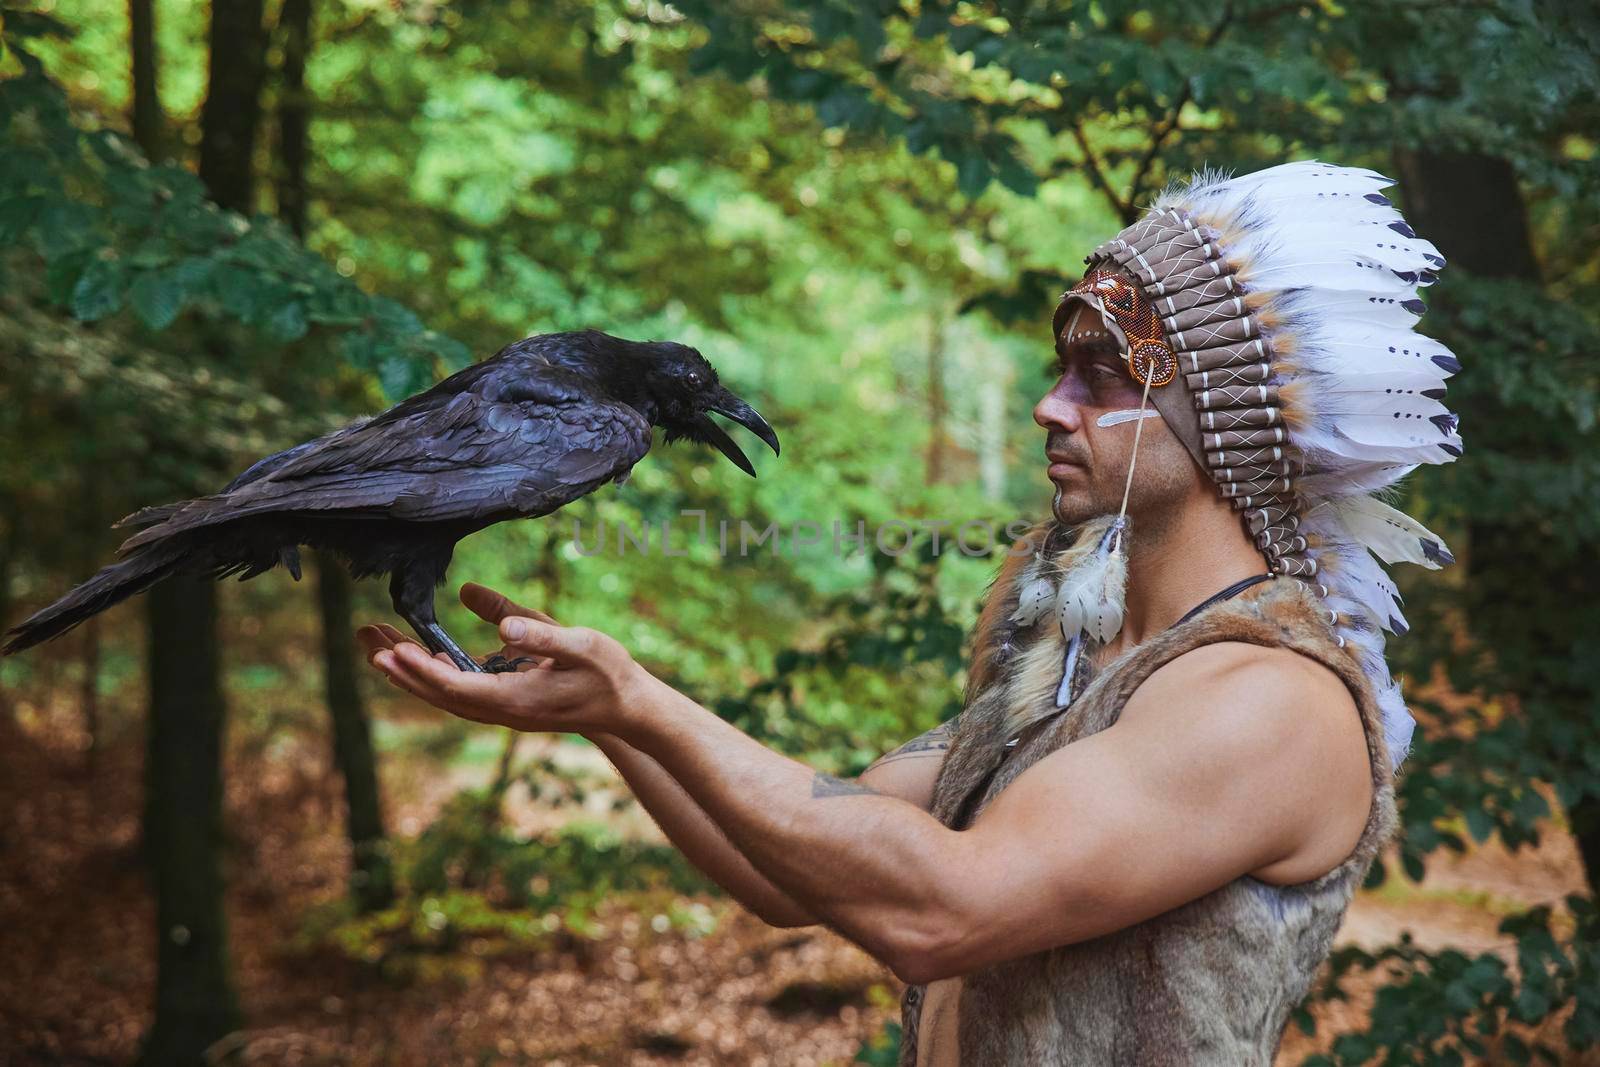 A man in traditional Native American clothing holding a crow in the evening forest